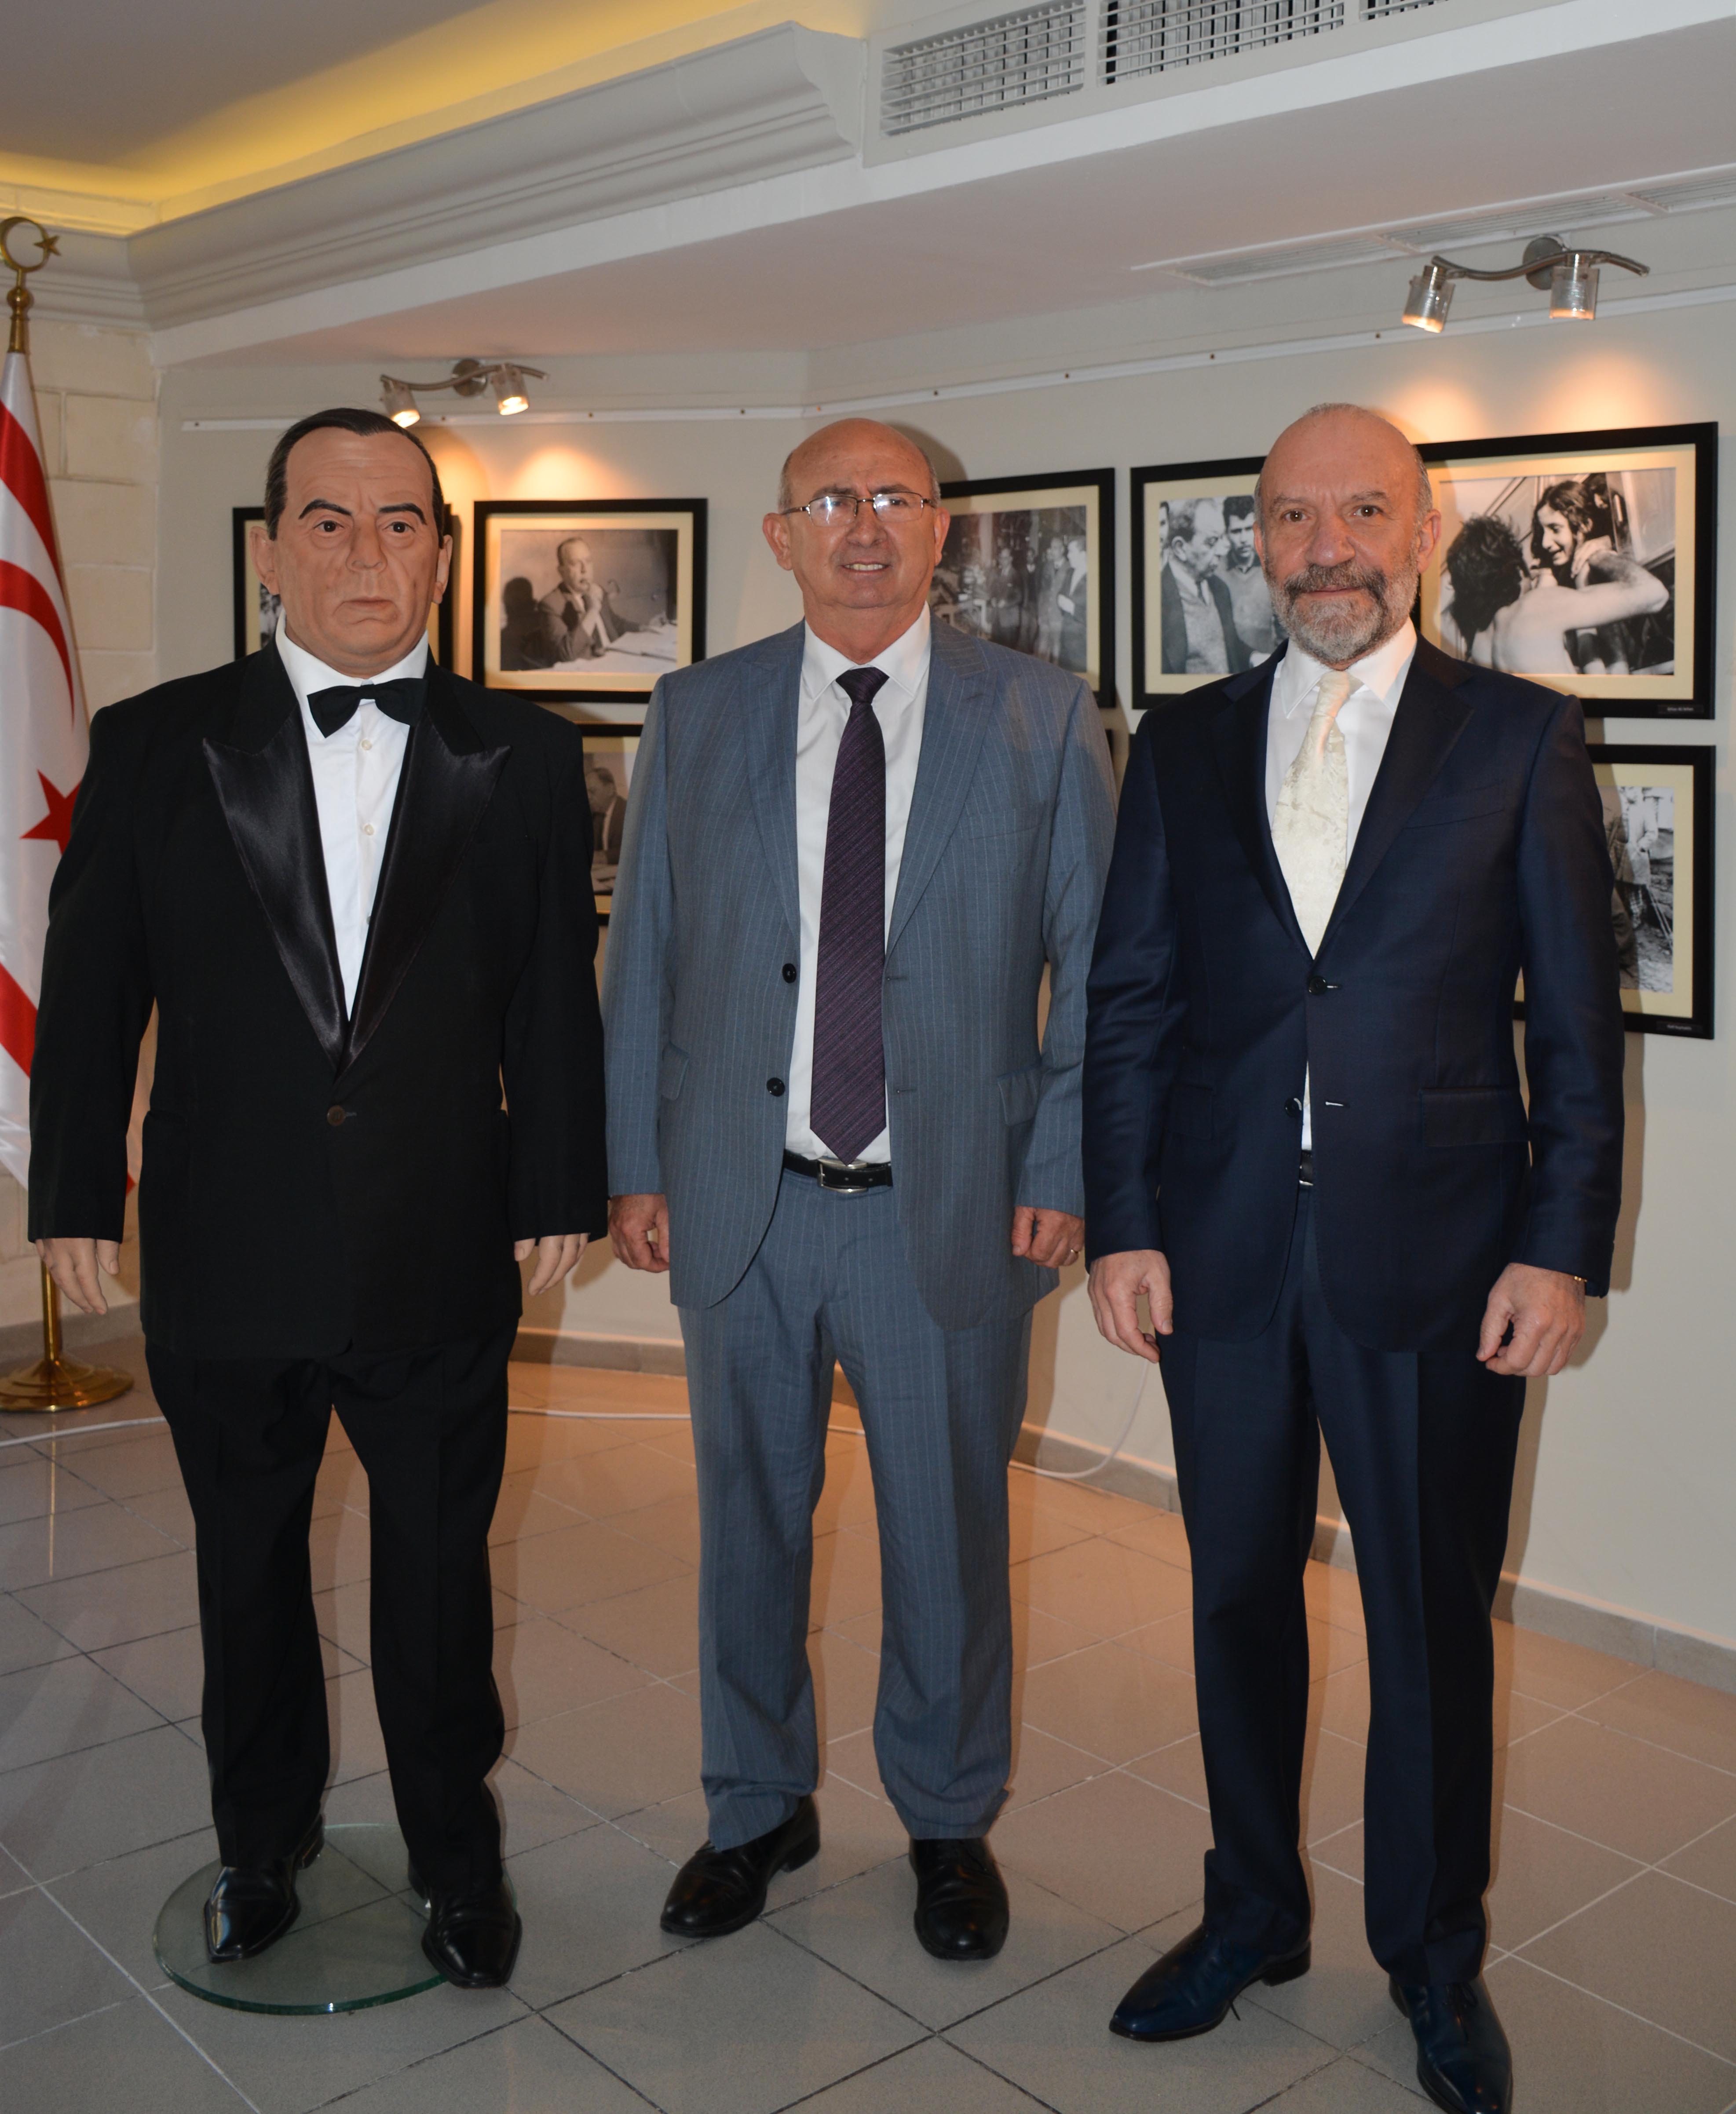 Minister of National Education and Culture Cemal Özyiğit: “The National Struggle of the Turkish Cypriots will be passed onto future Generations…”